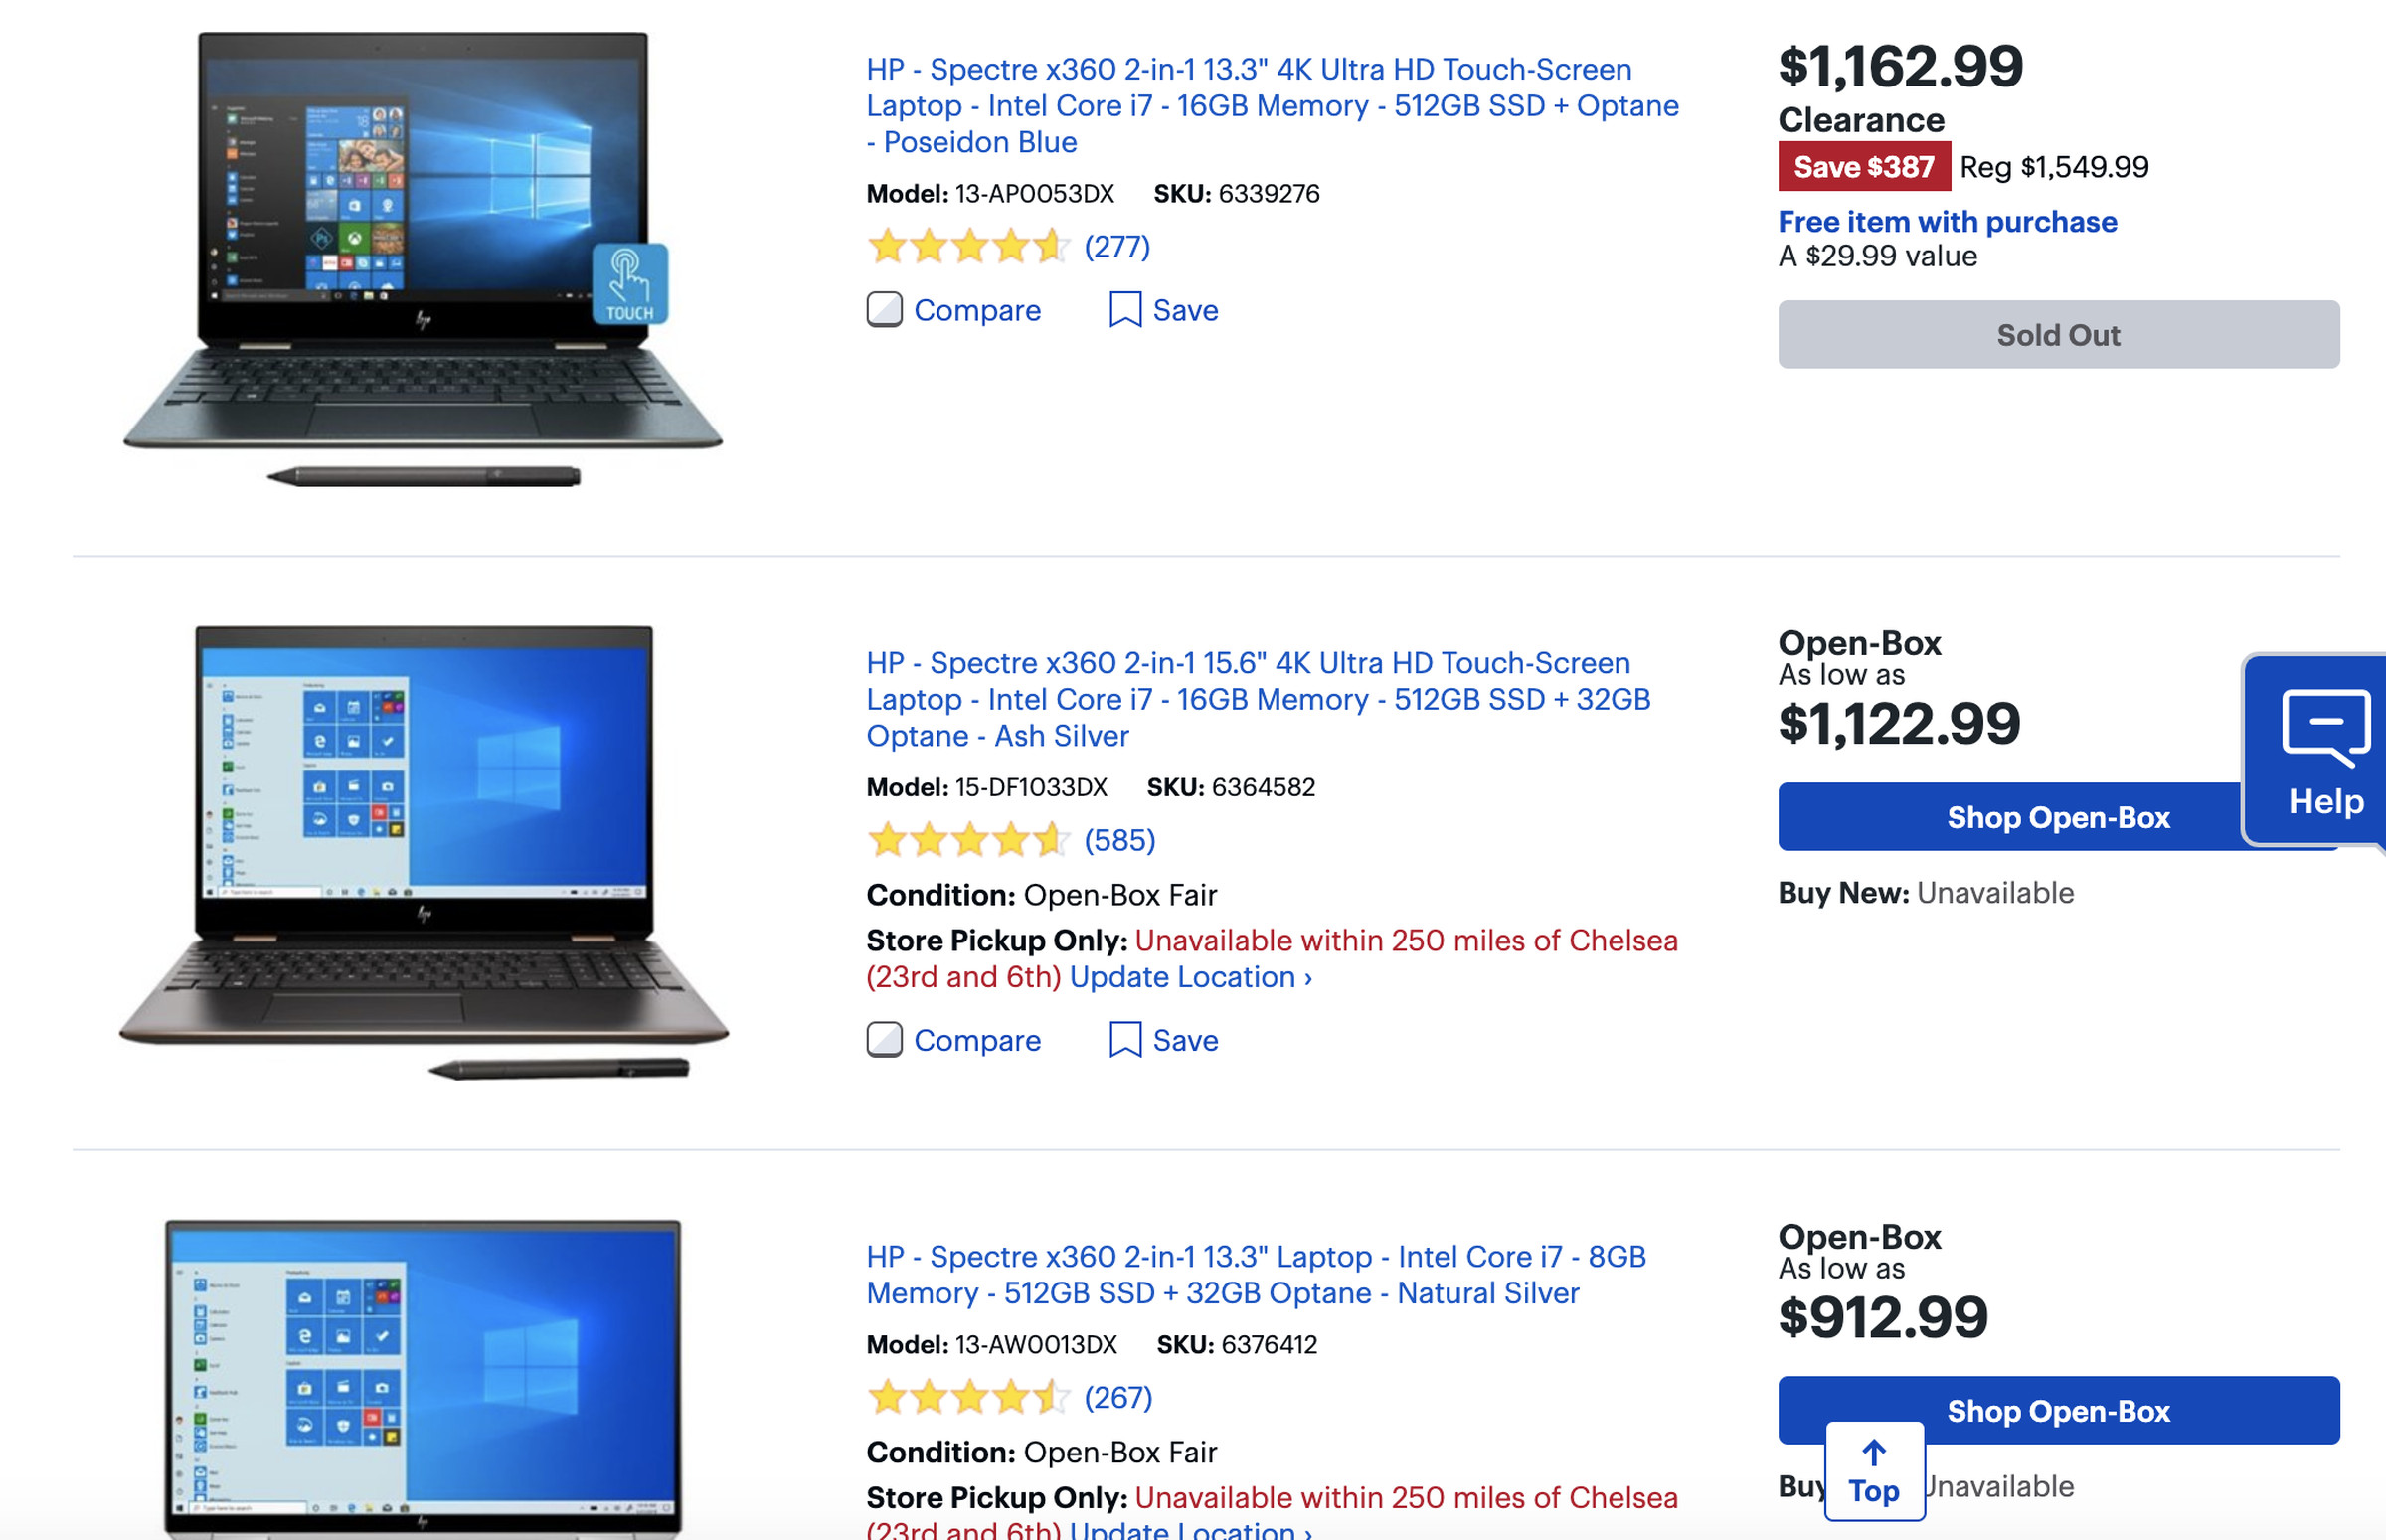 Spectre x360 models at Best Buy shown as sold out or unavailable.